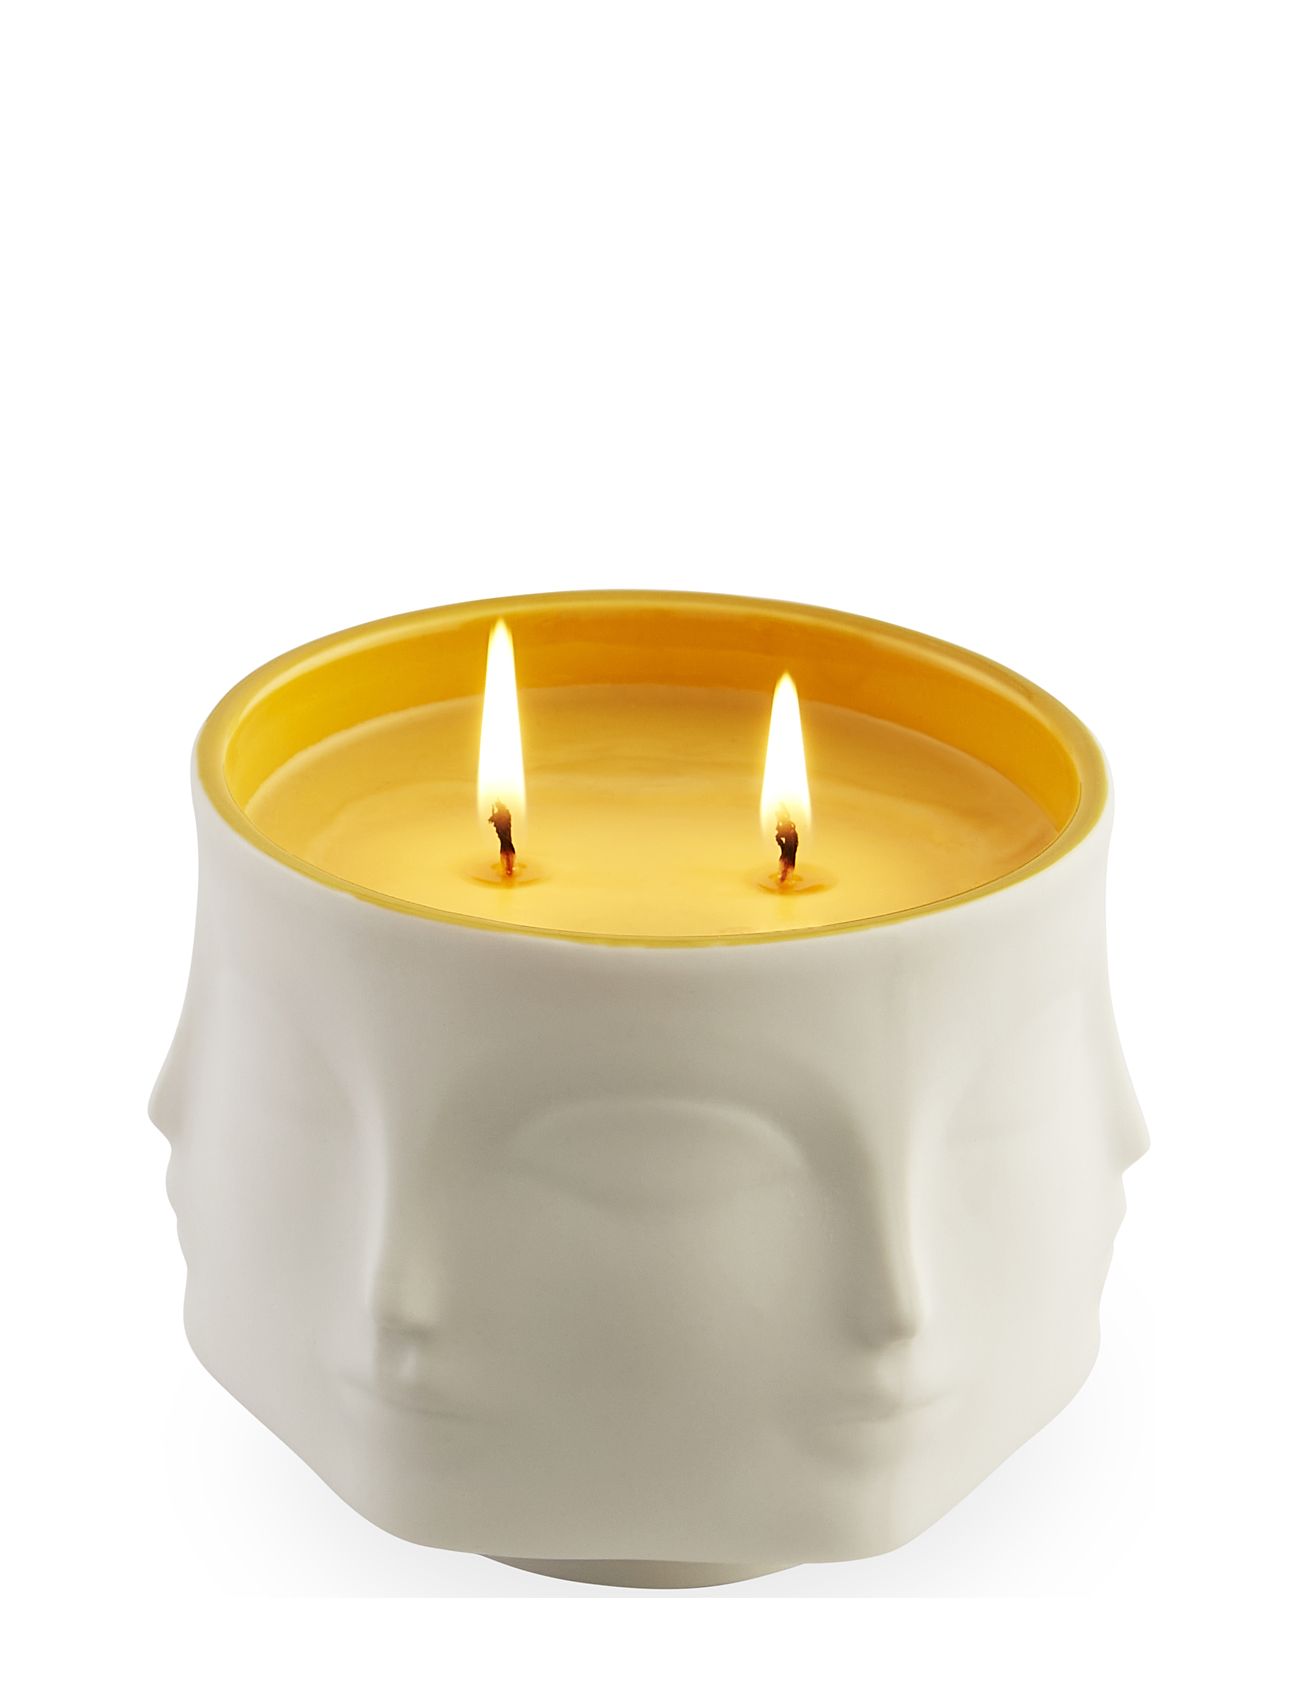 Muse Pamplemousse Candle Home Decoration Candles Block Candles Yellow Jonathan Adler